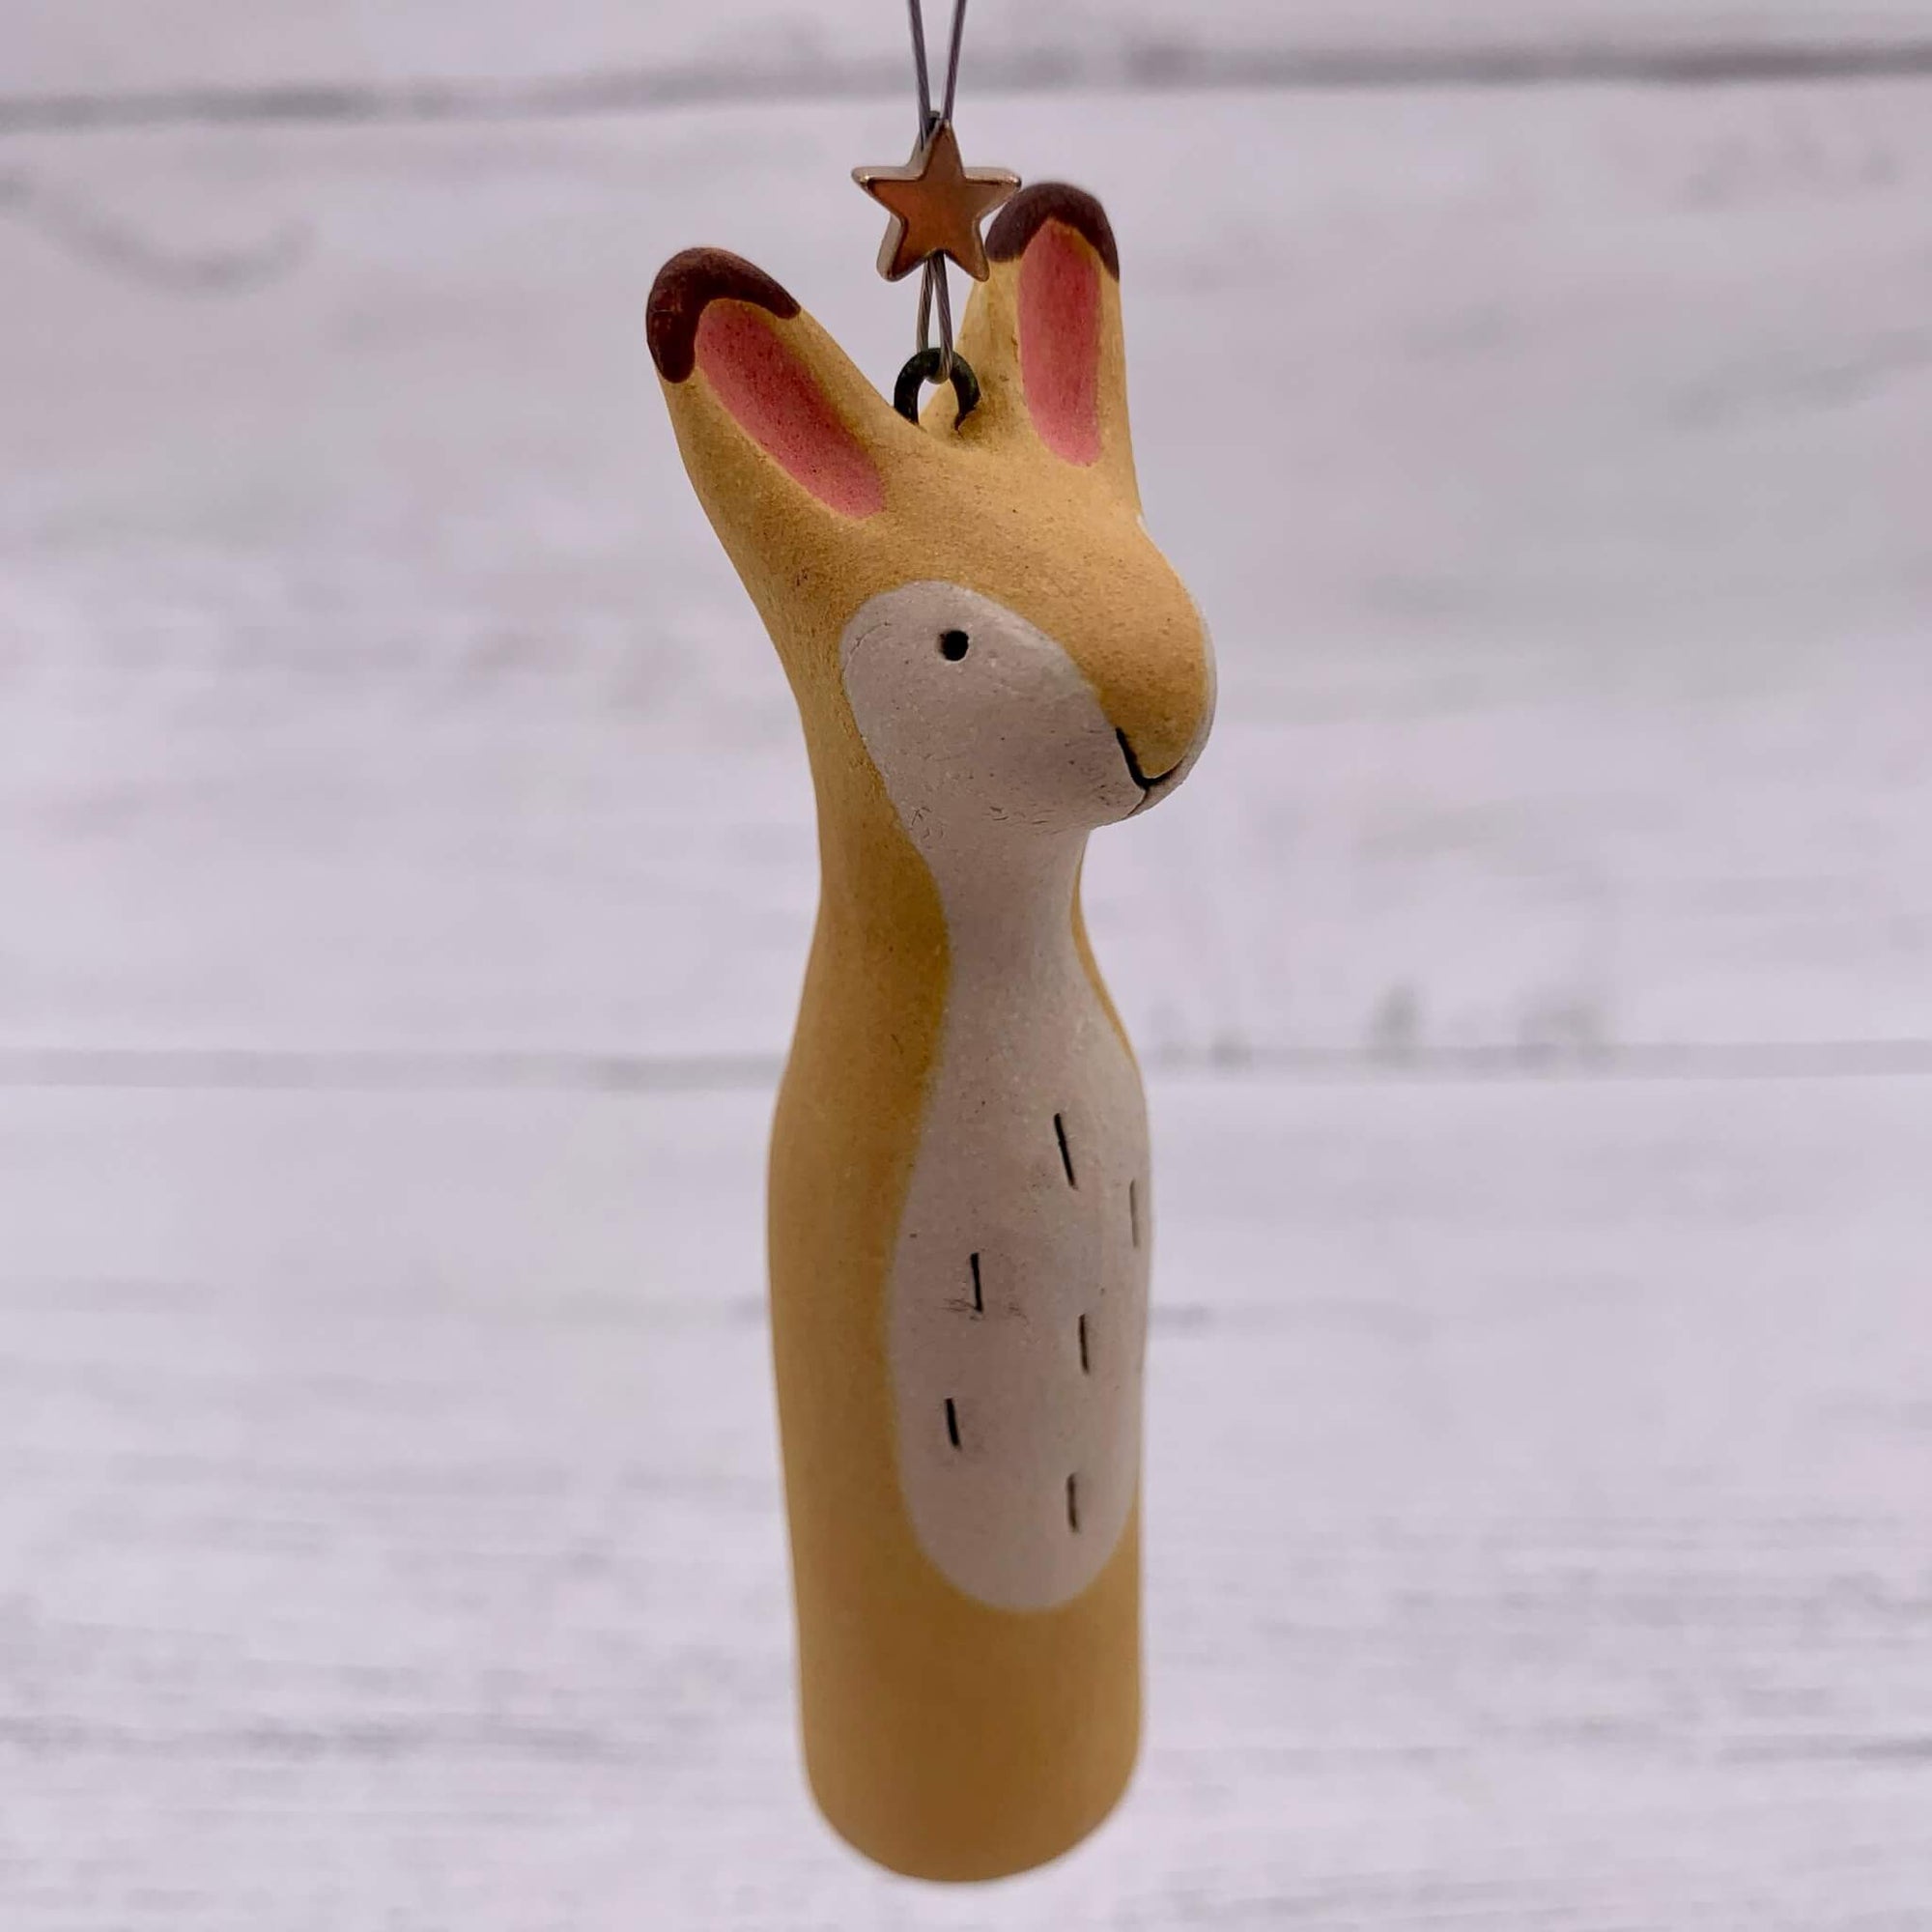 Handmade ceramic hanging of a yellow hare, with a silver star.